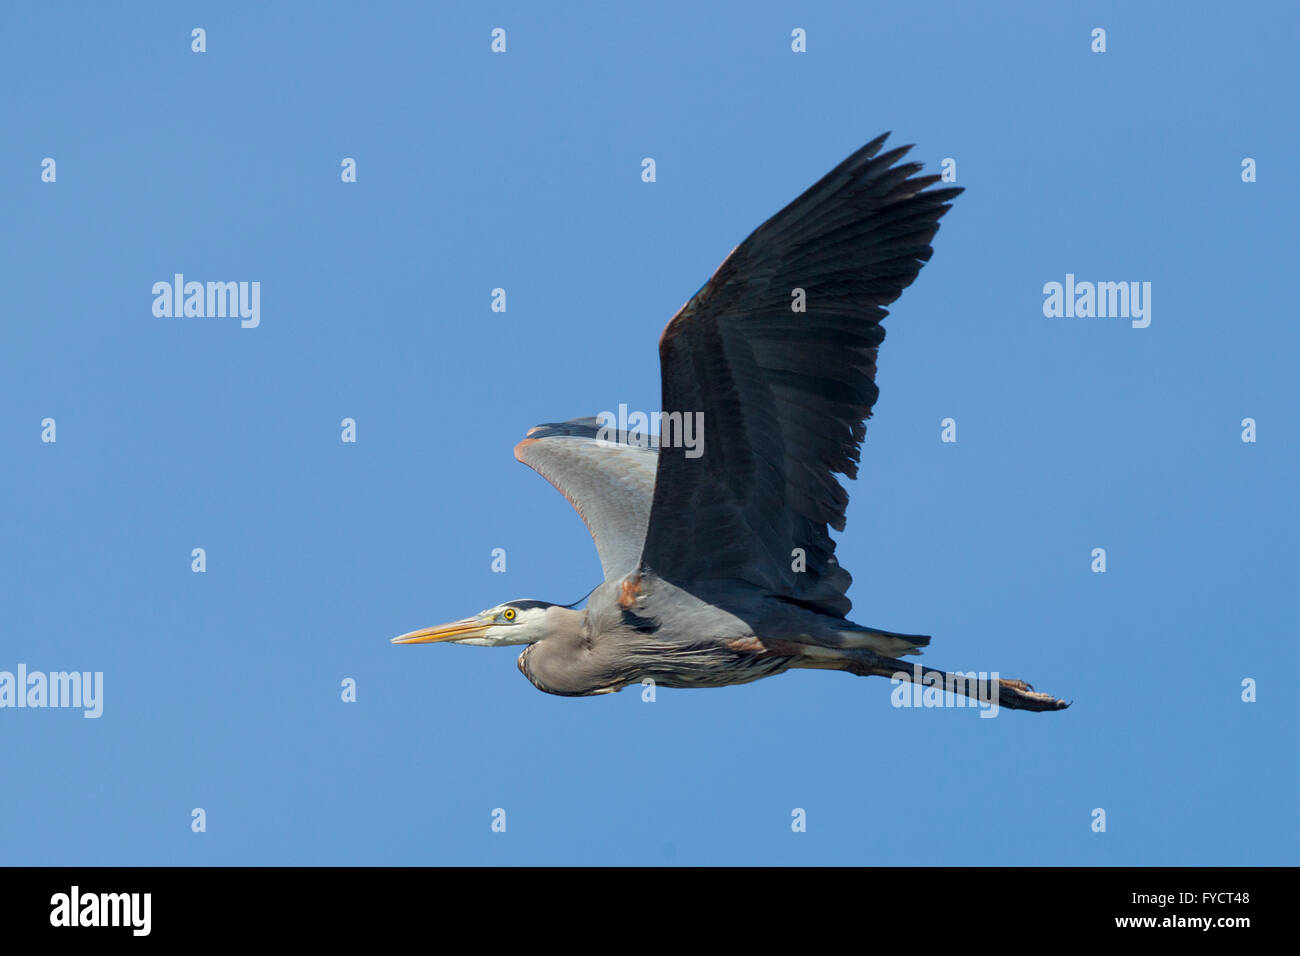 Heron with wings spread in sky. Stock Photo